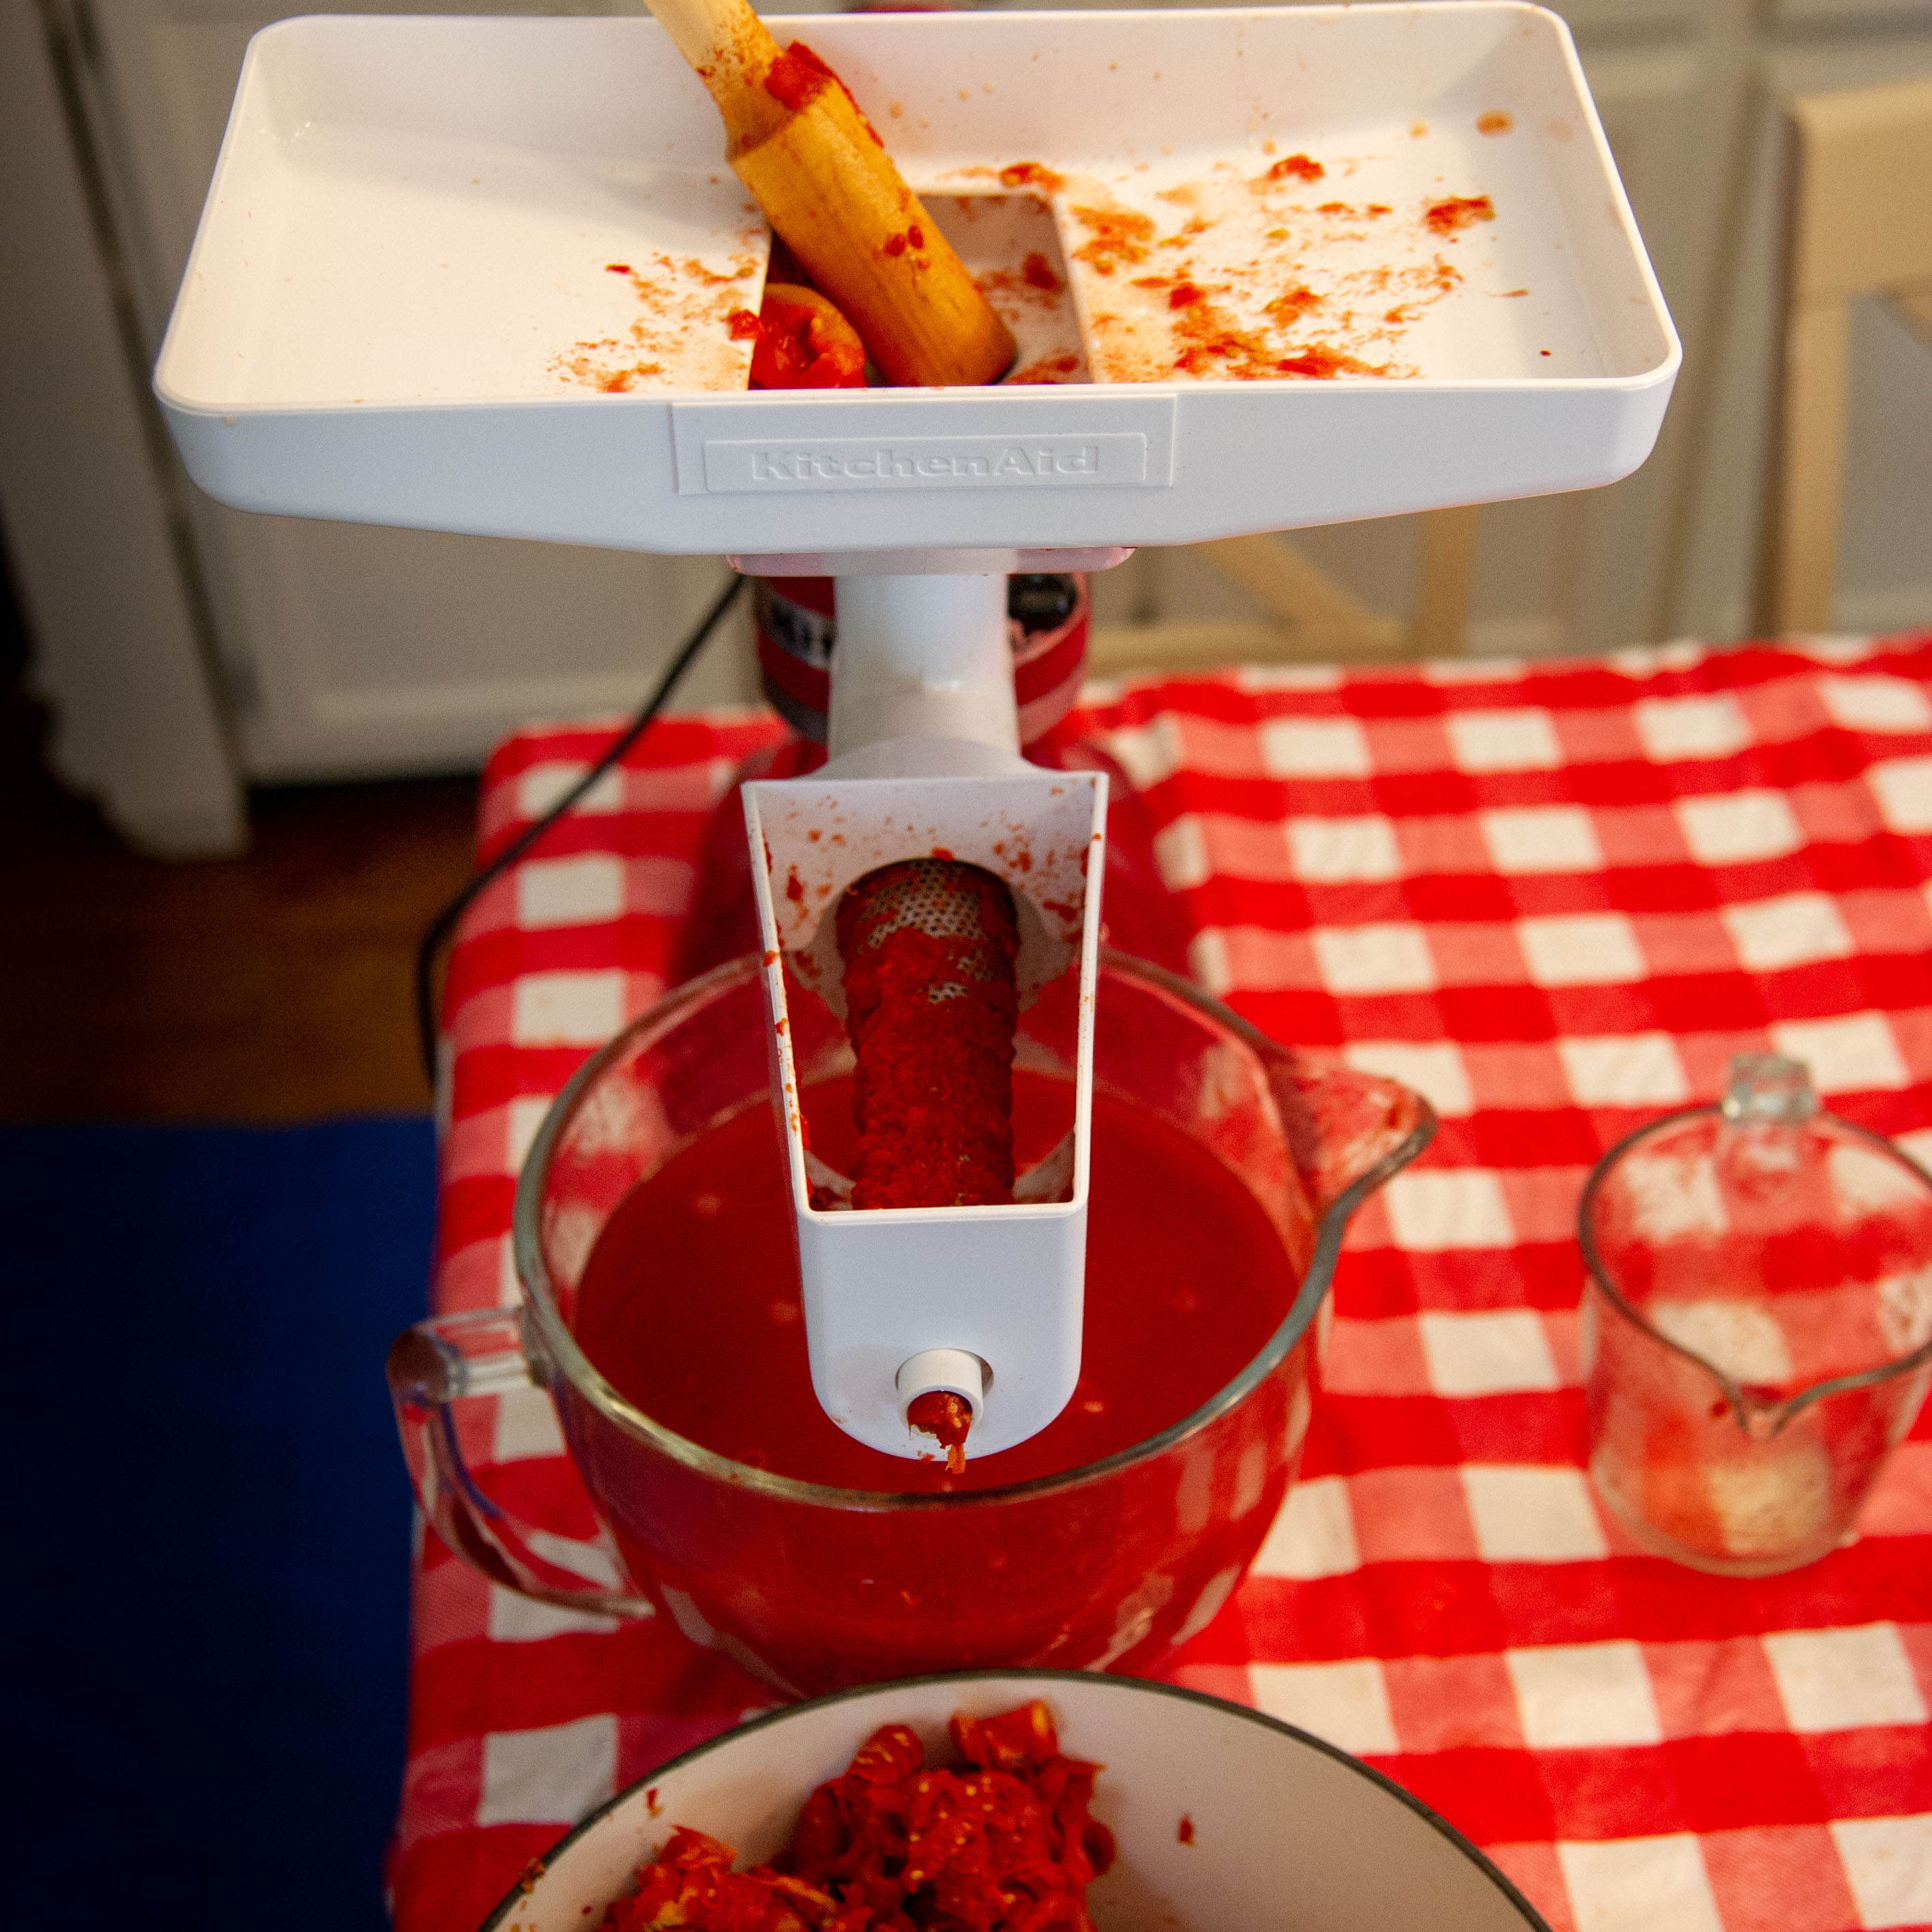 kitchen aid mixer with food grinder attached to make tomato juice